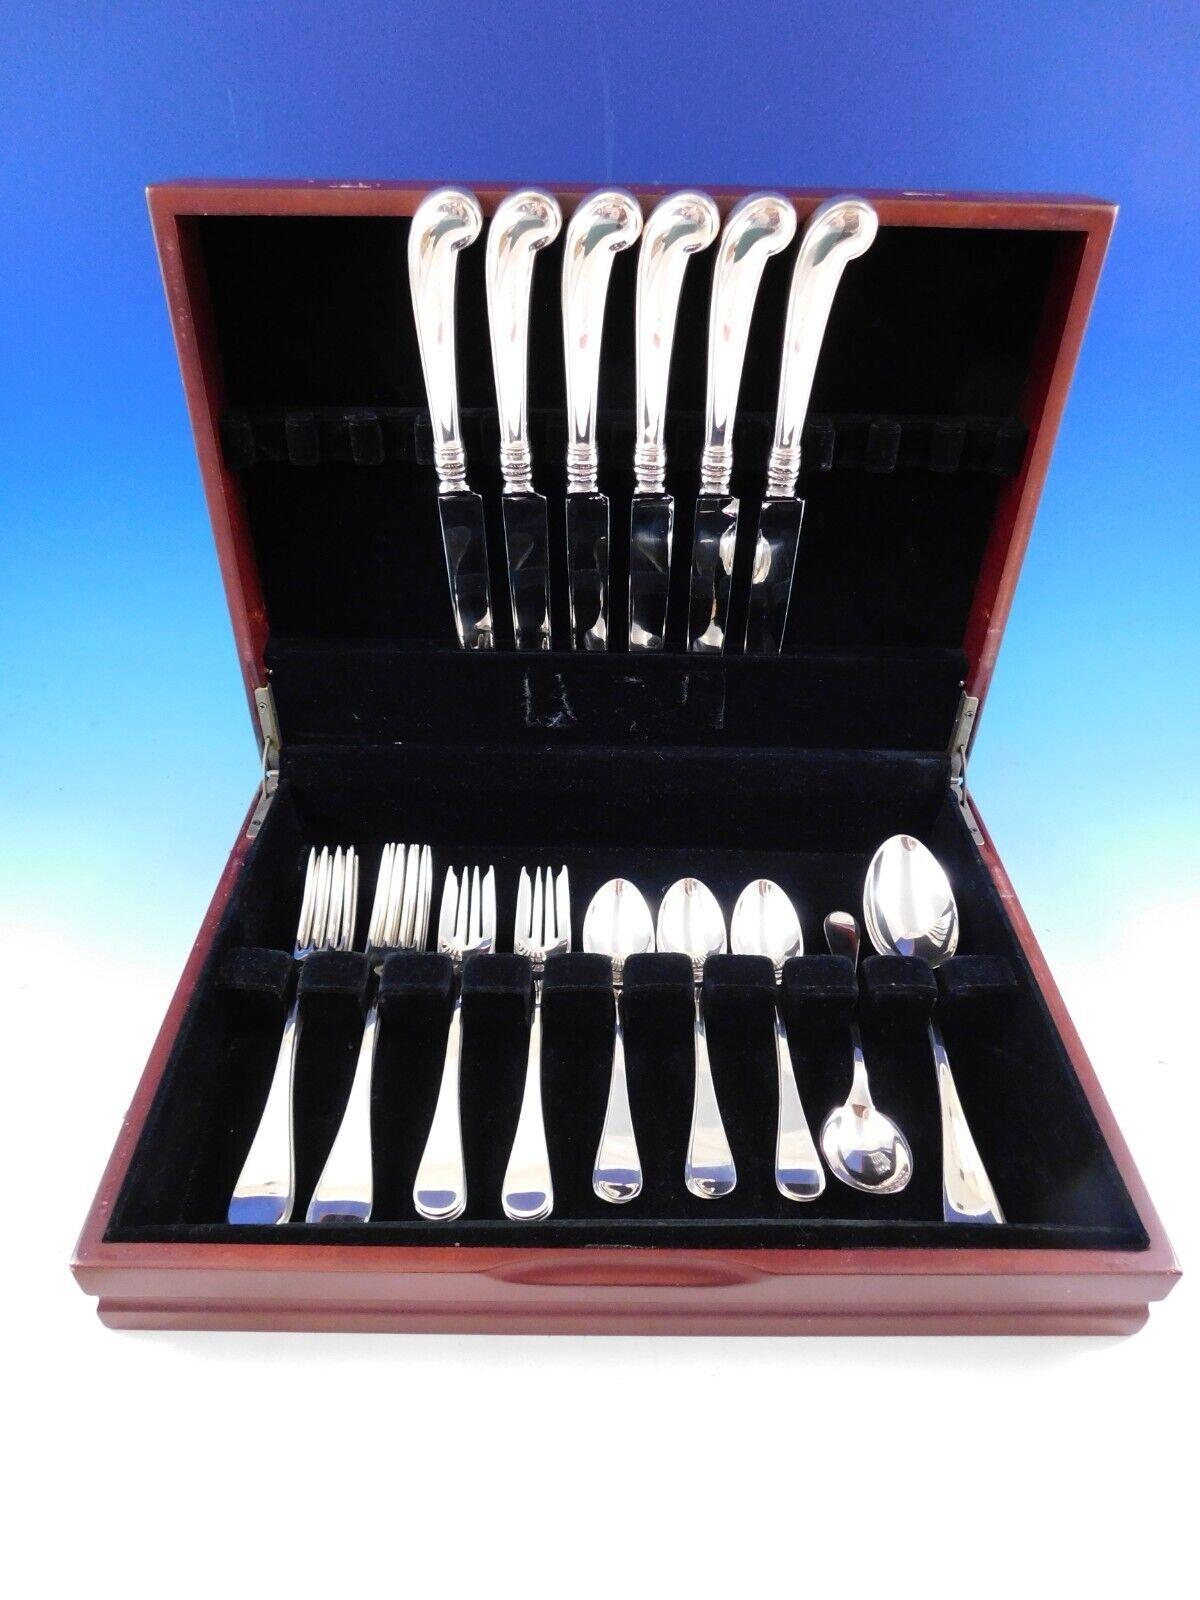 Dinner Size King William by Tiffany and Co. sterling silver Flatware set, 26 pieces. This Old English style pattern was introduced in the year 1870. The pieces are large and heavy, with wonderful pistol grip handle knives. This set includes:

6